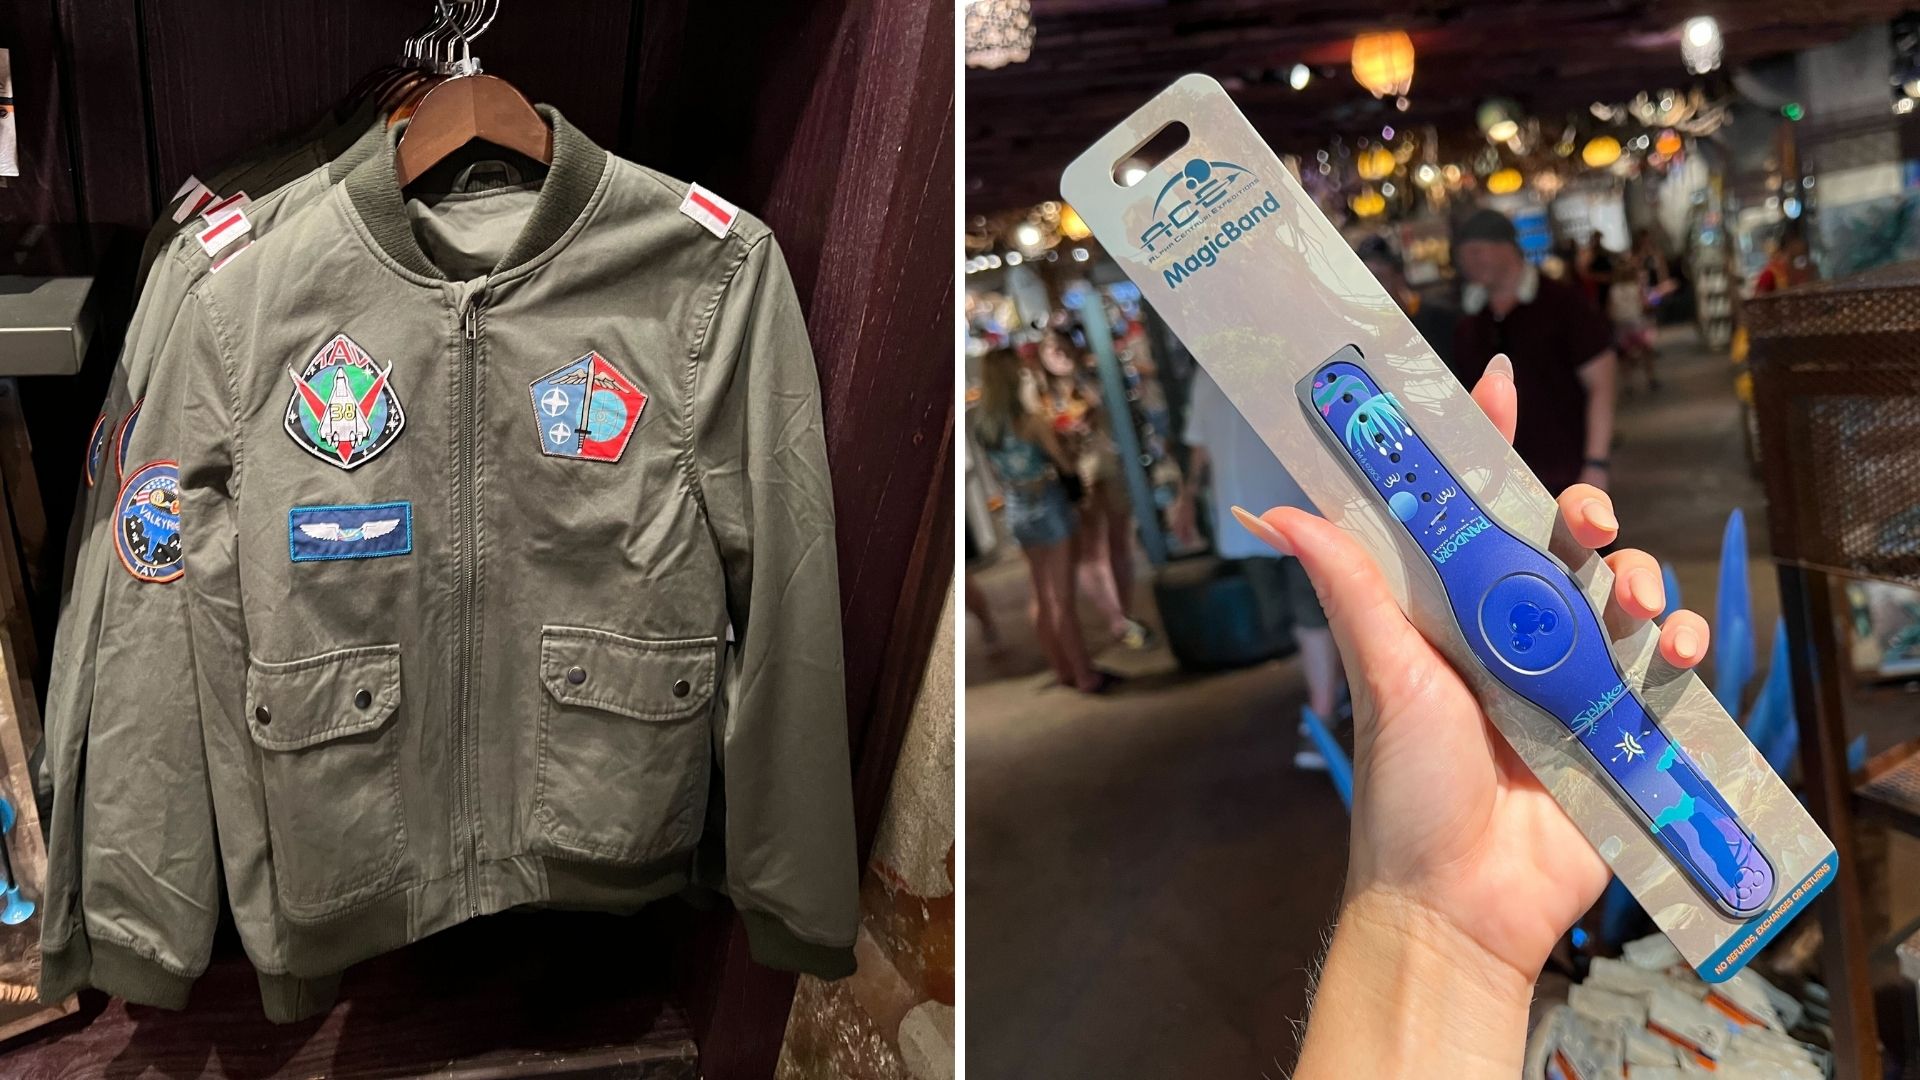 New flight jacket and magicband available in pandora